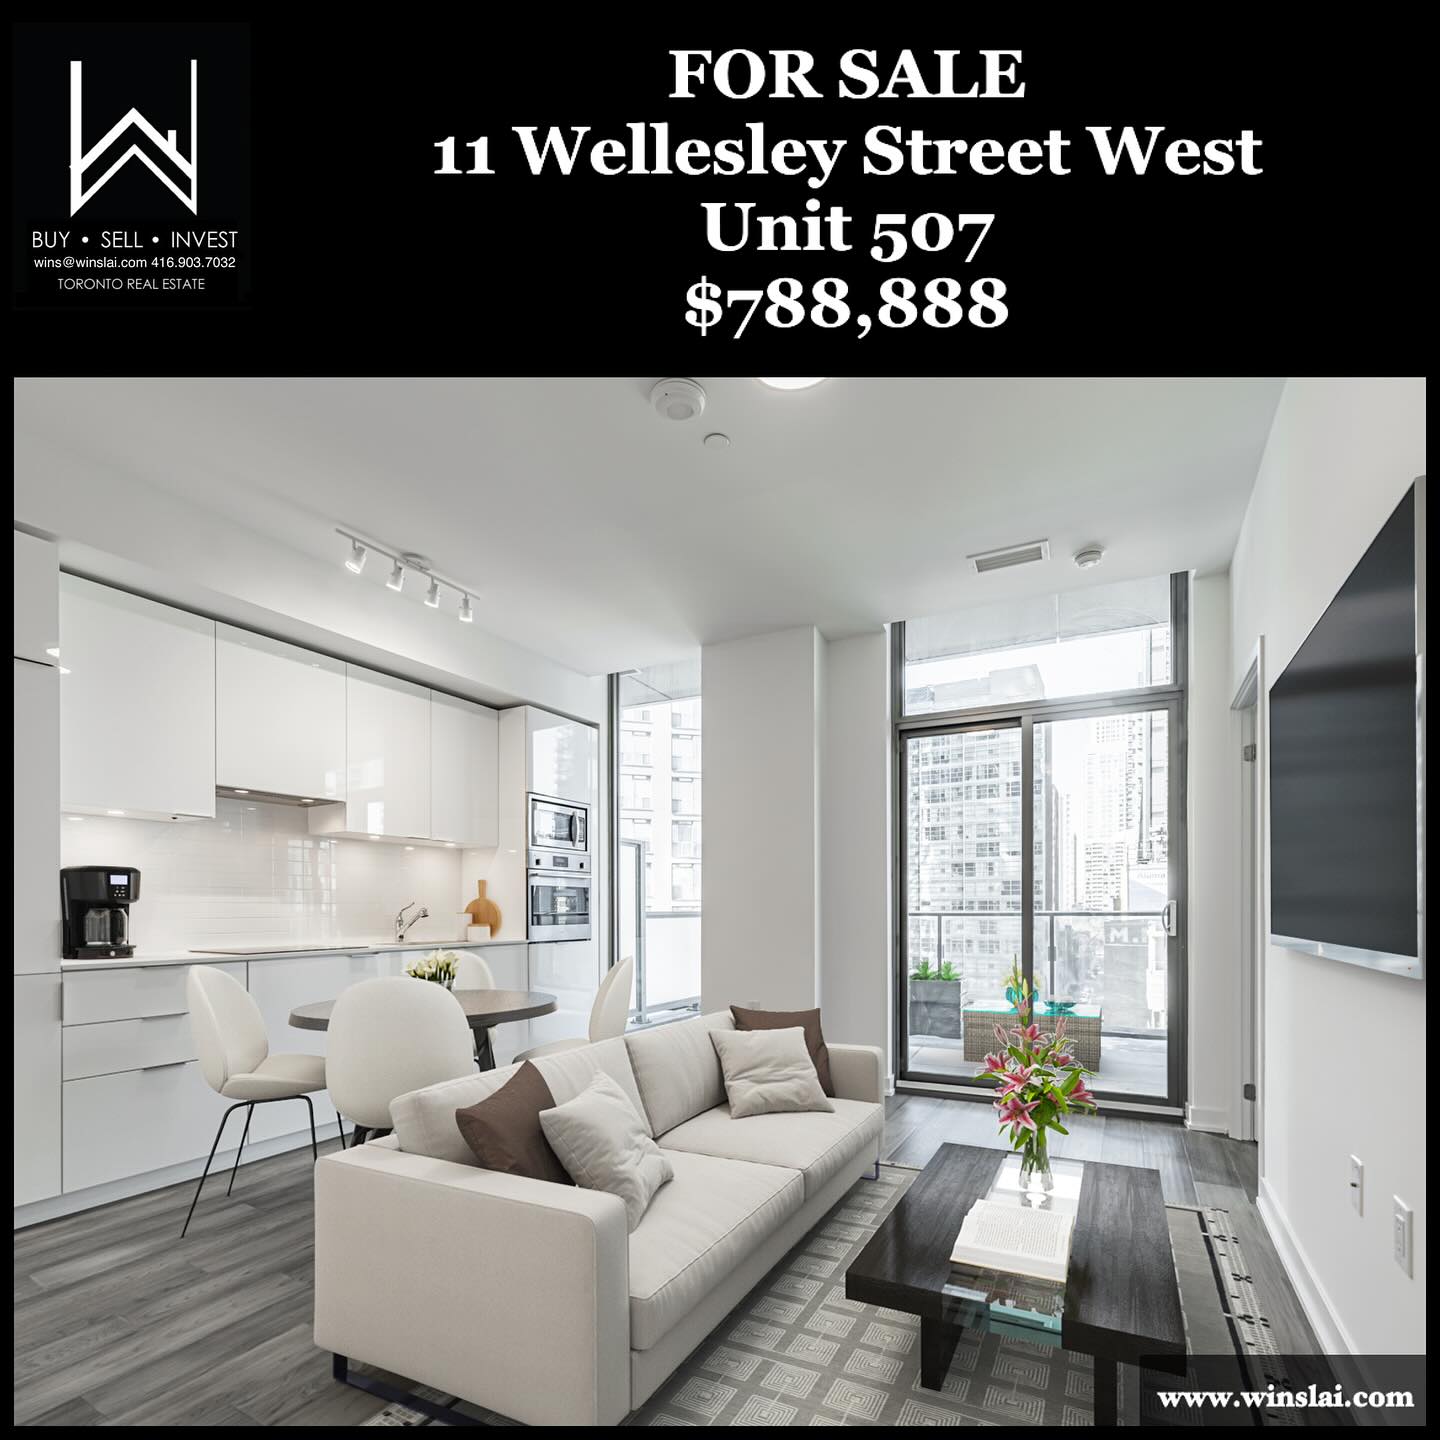 For Sale flyer for 11 Wellesley St W Unit 507.